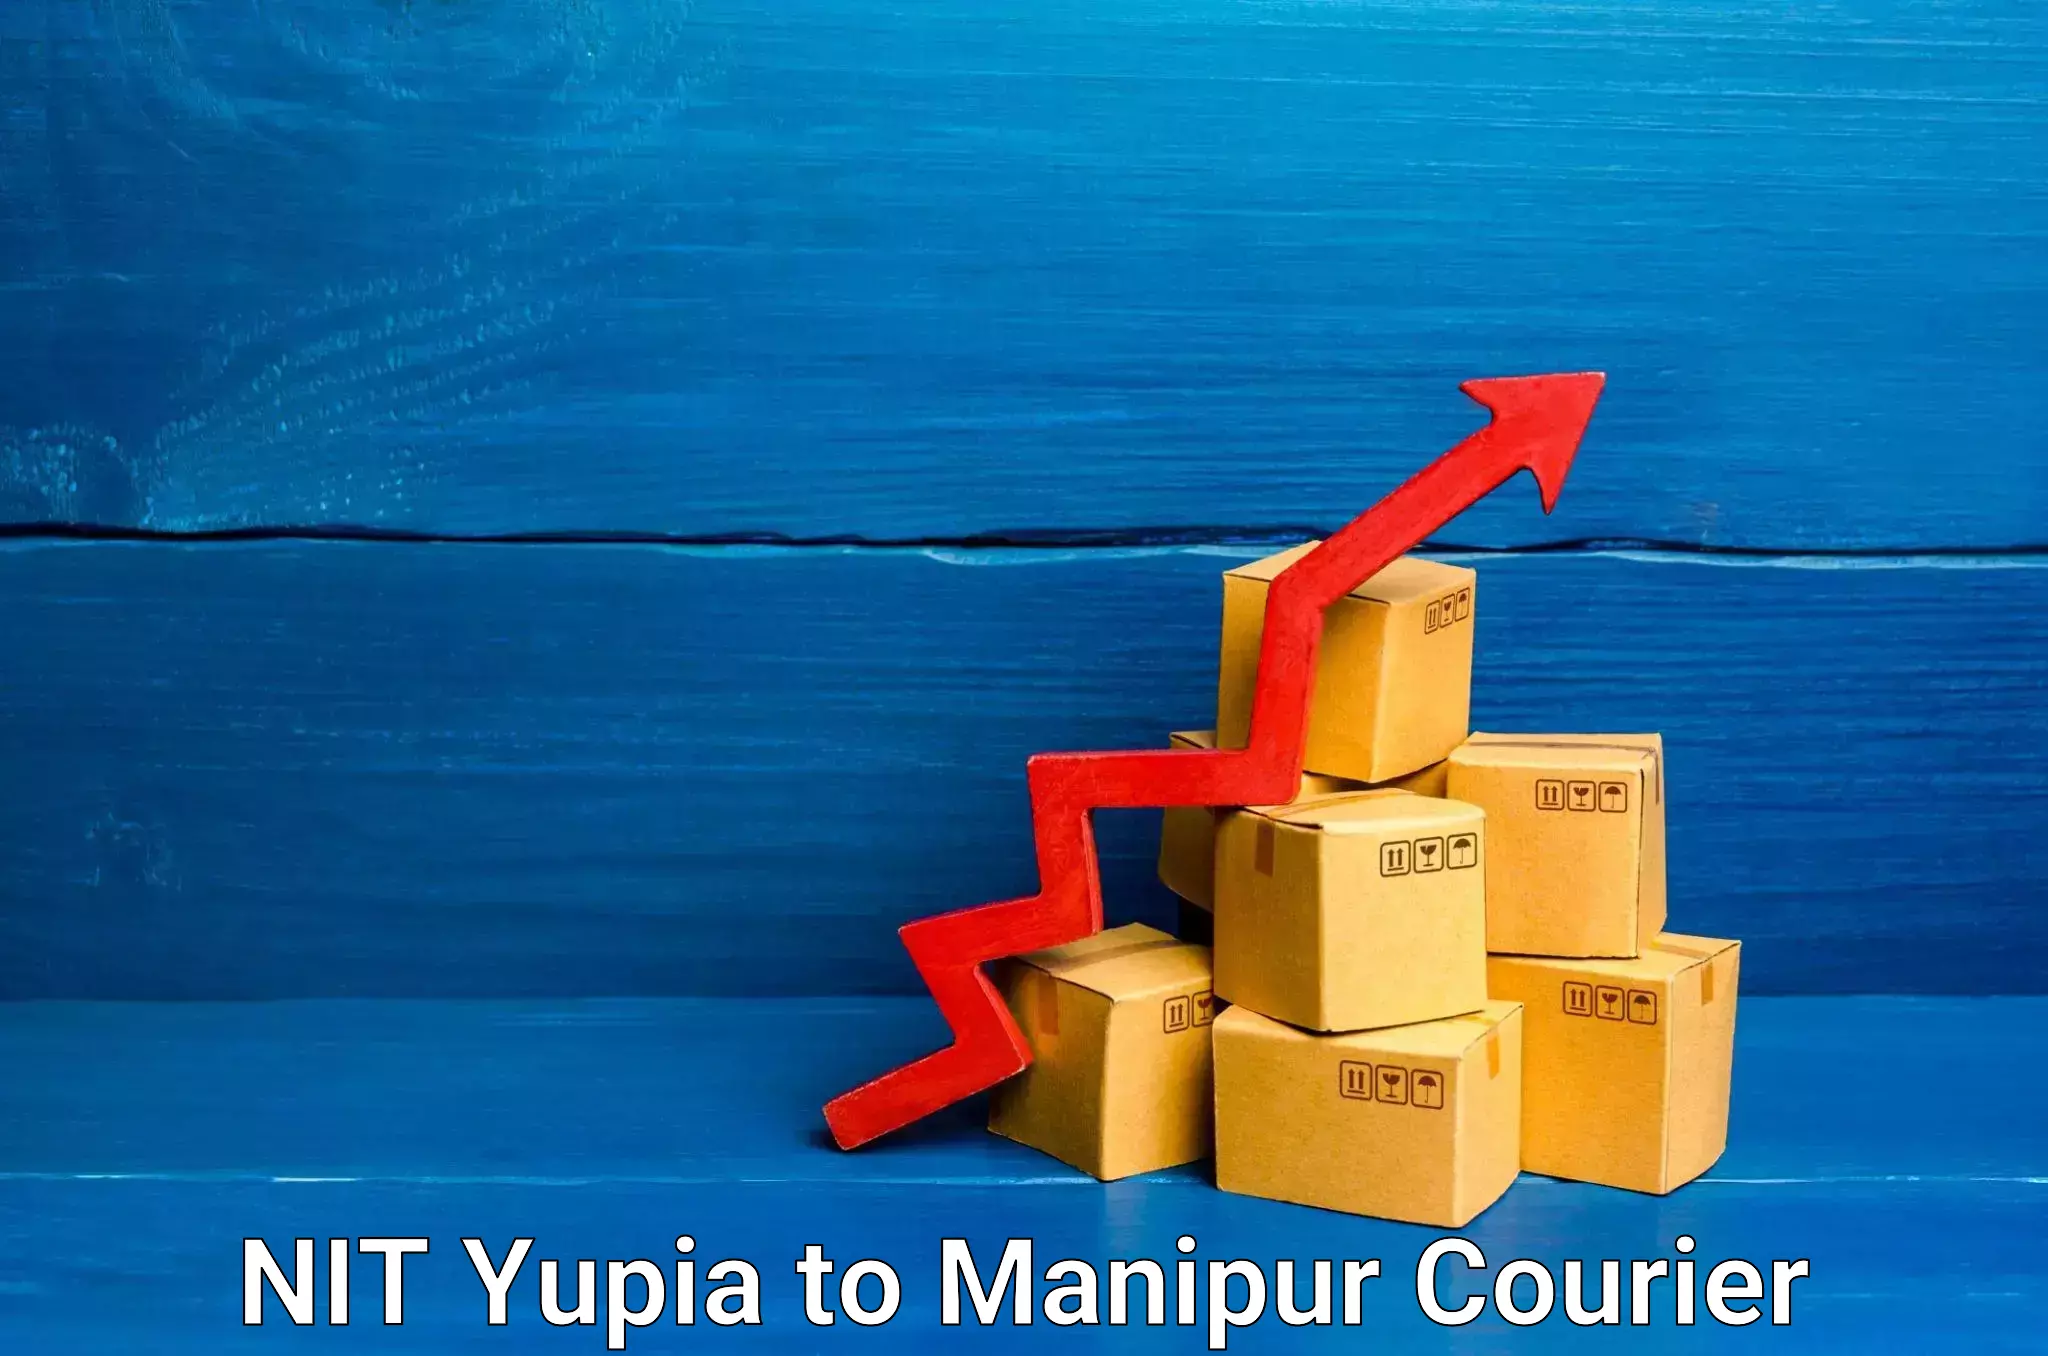 Courier service comparison NIT Yupia to Manipur